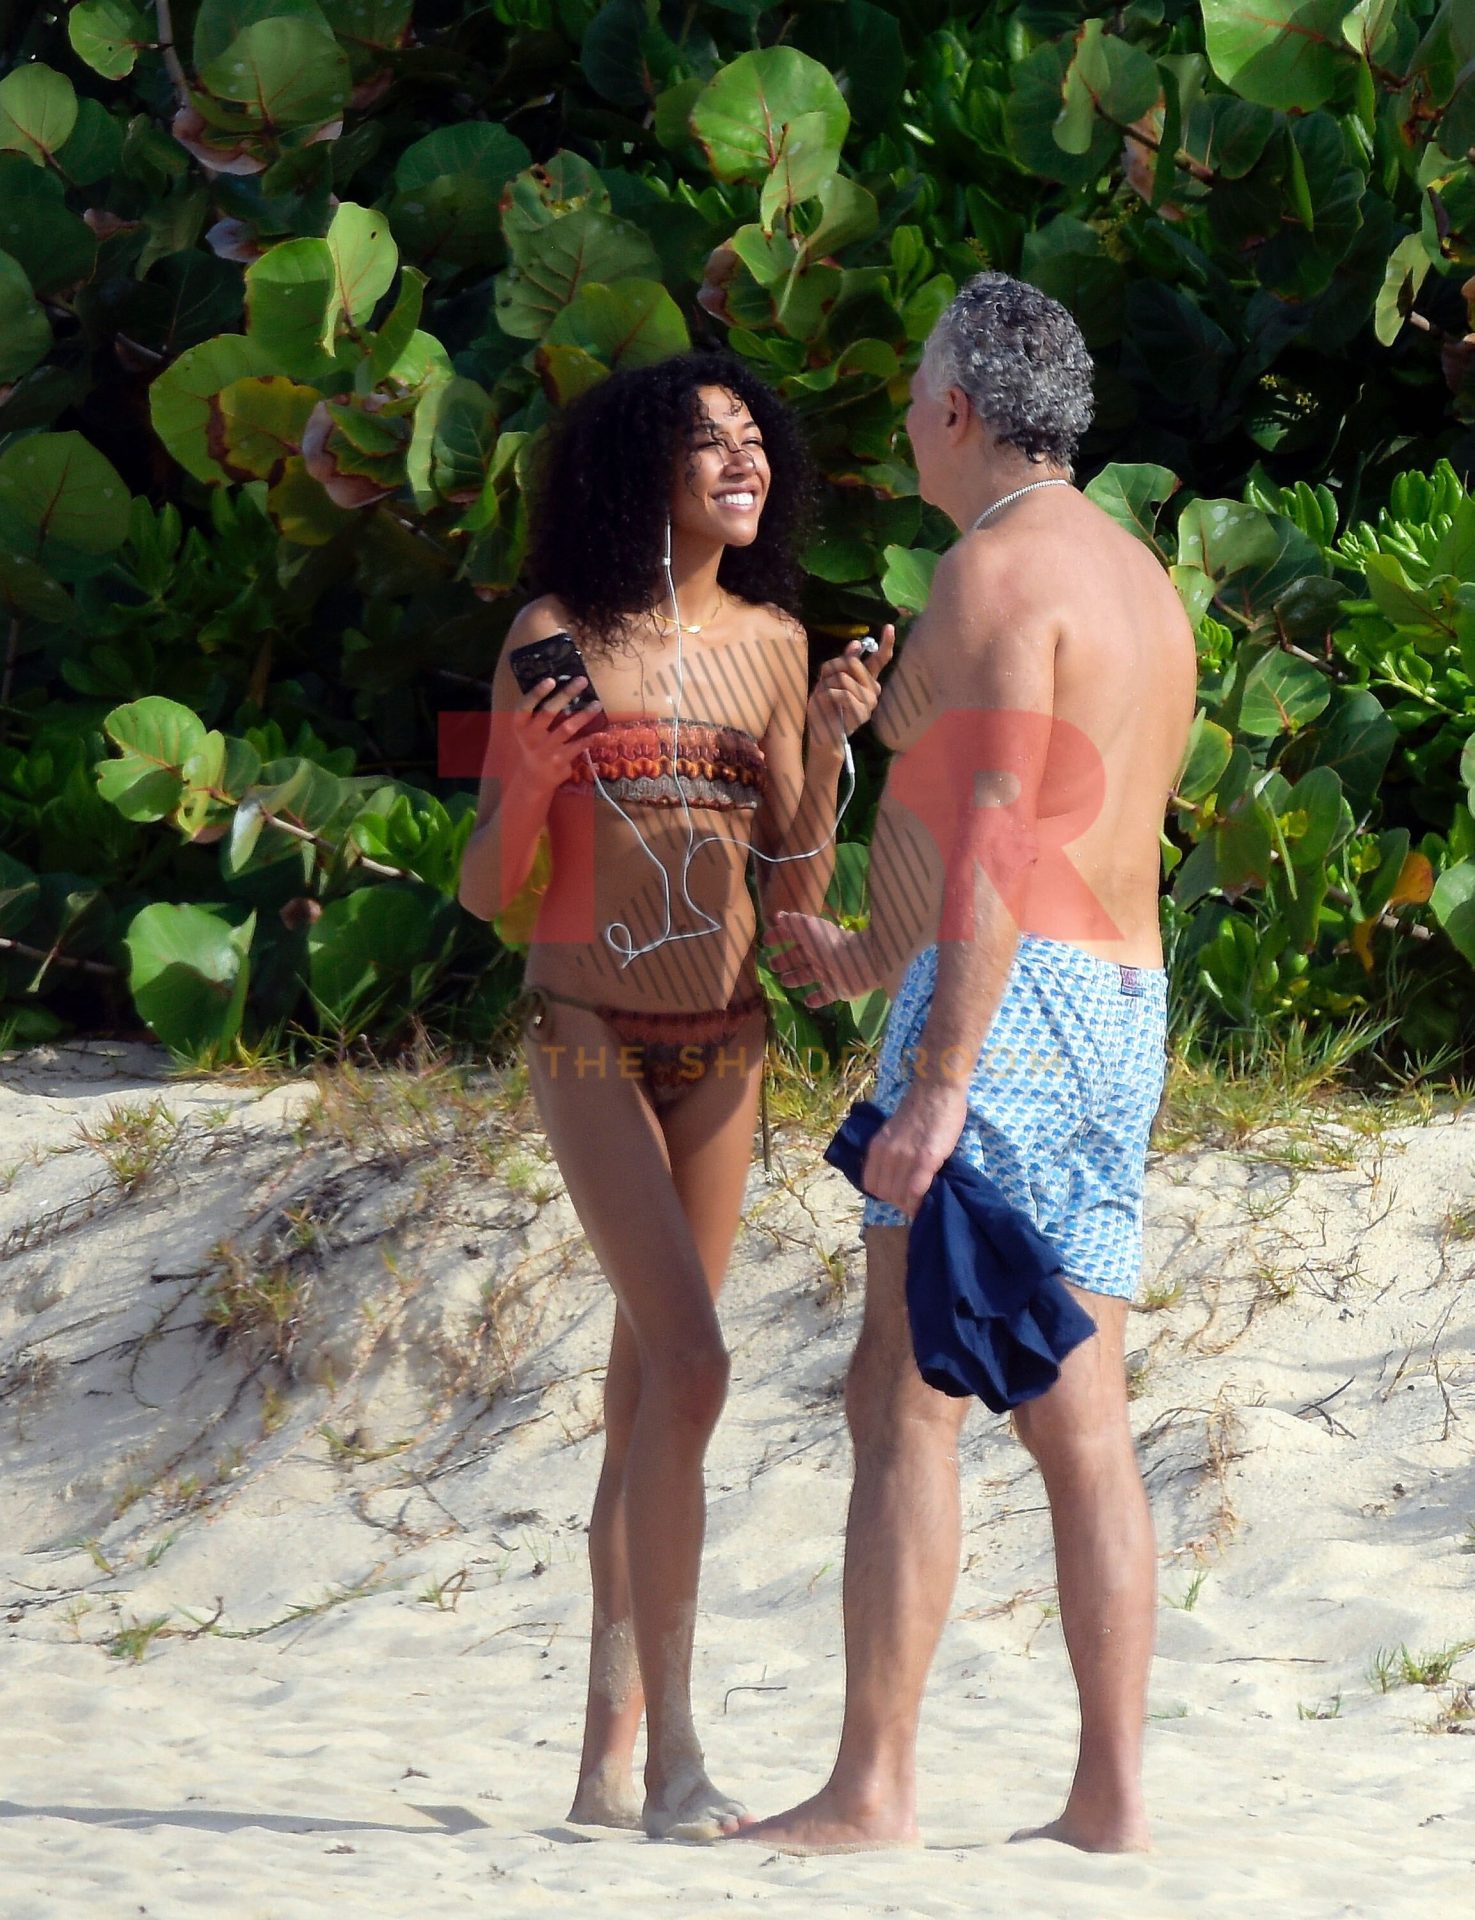 See Photos Of Aoki Lee Simmons And Vittorio Assaf In St. Barts